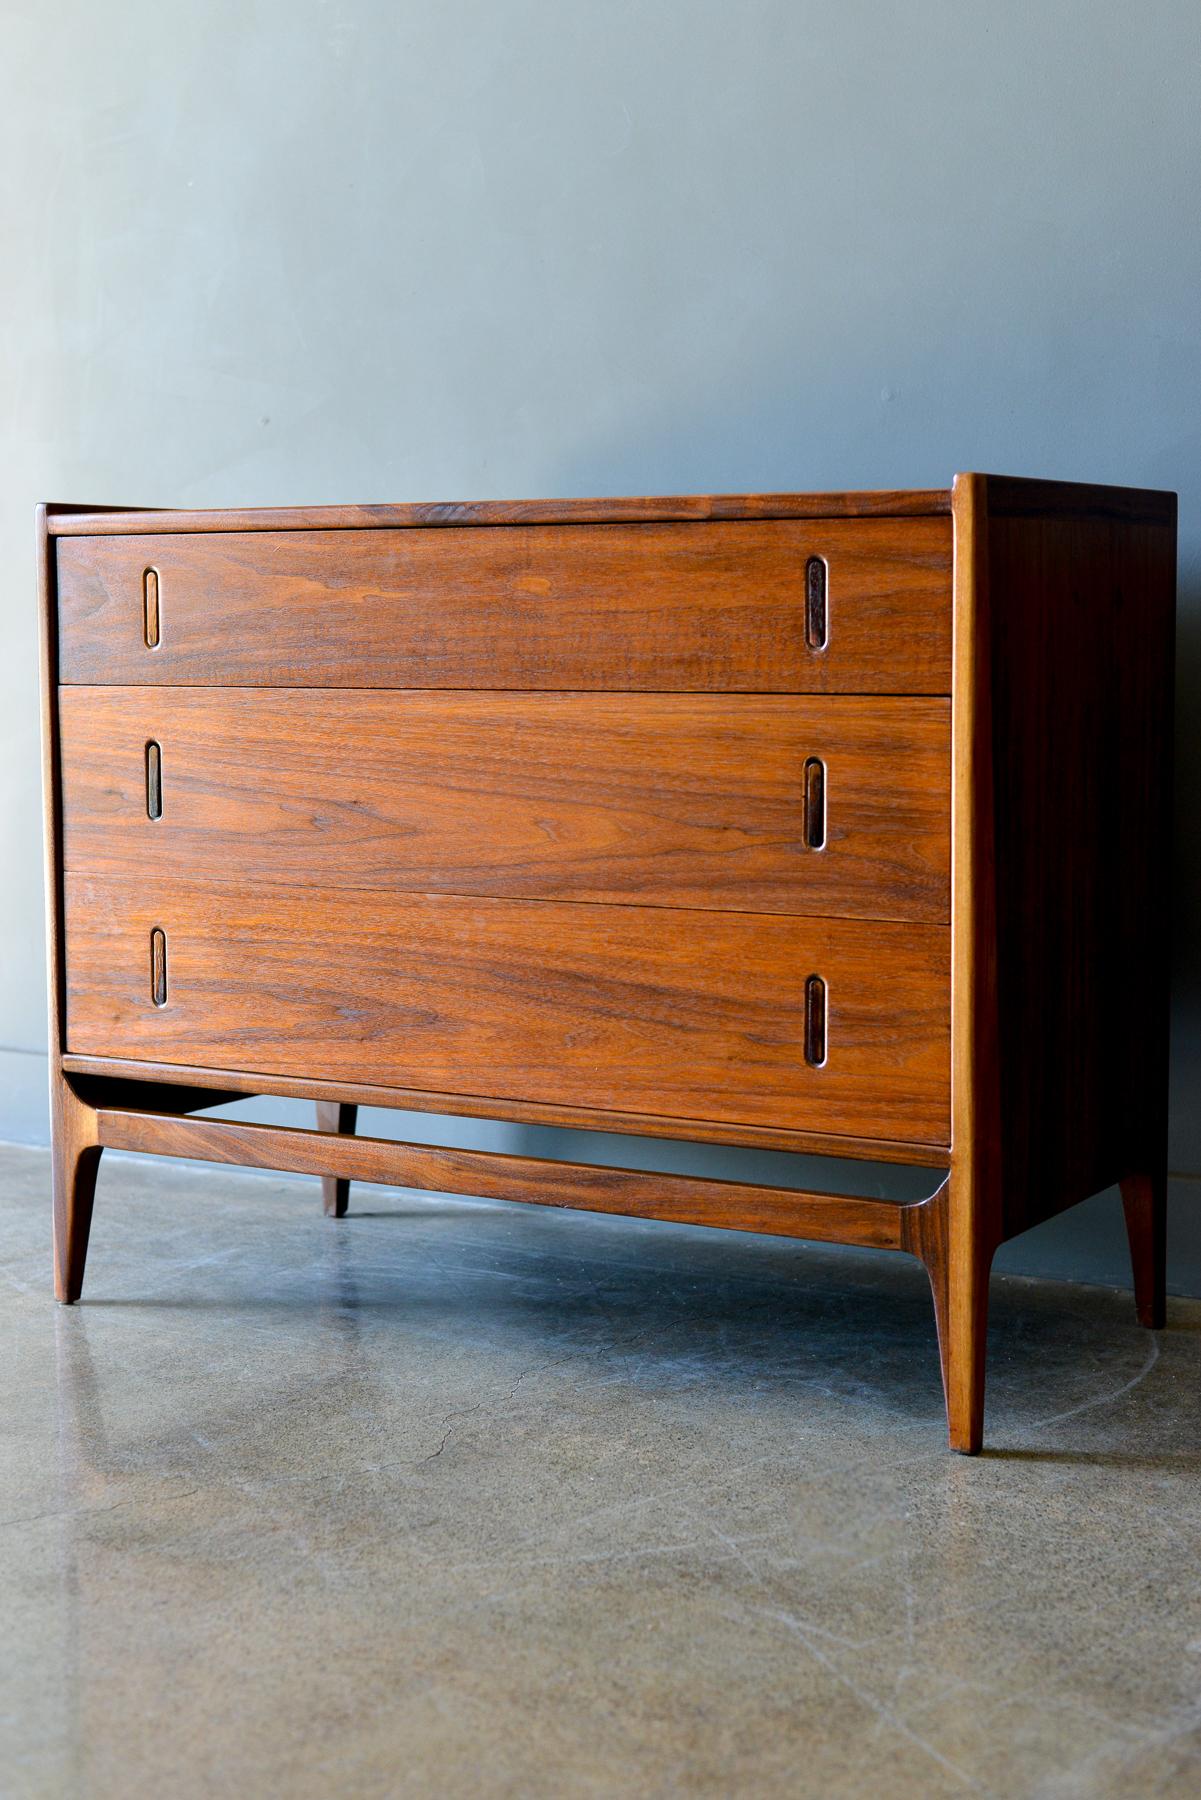 Richard Thompson for Glenn of California 3 drawer chest or cabinet, ca. 1960. Beautiful walnut grain with delicate rocking rosewood pulls on drawers. Could be used as a small dresser or nightstand. Measures 38